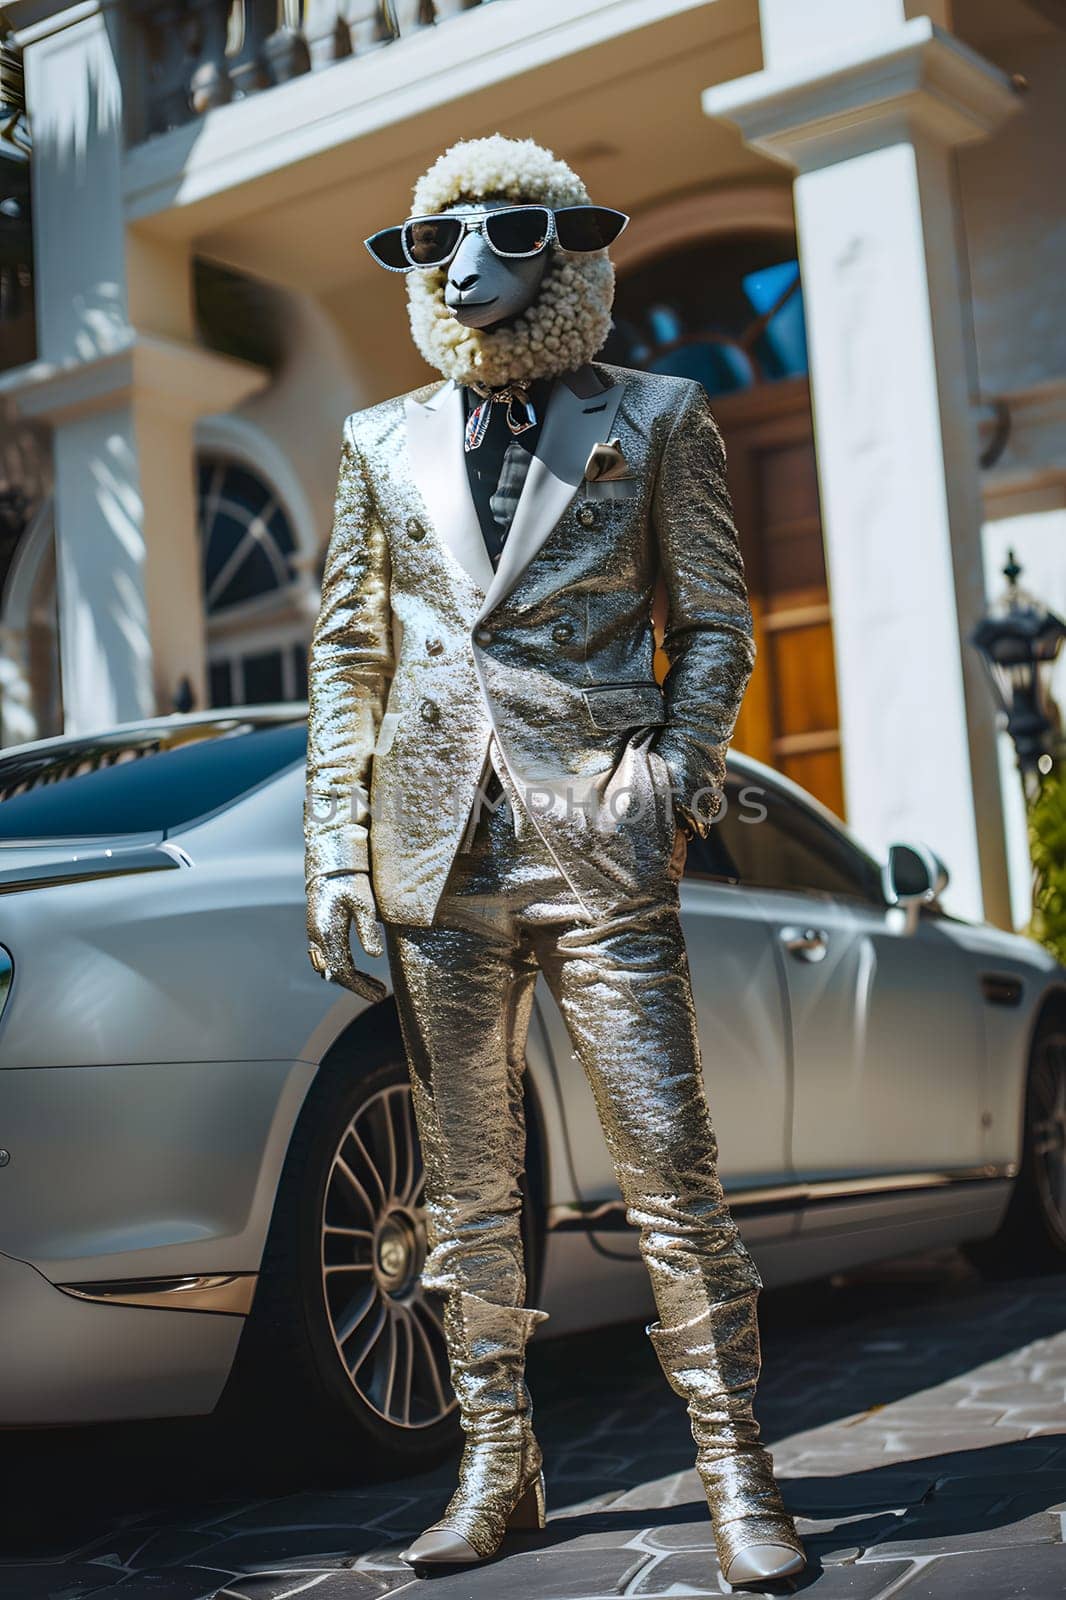 A sheepcostumed man stands near a silver car with a wheel by Nadtochiy